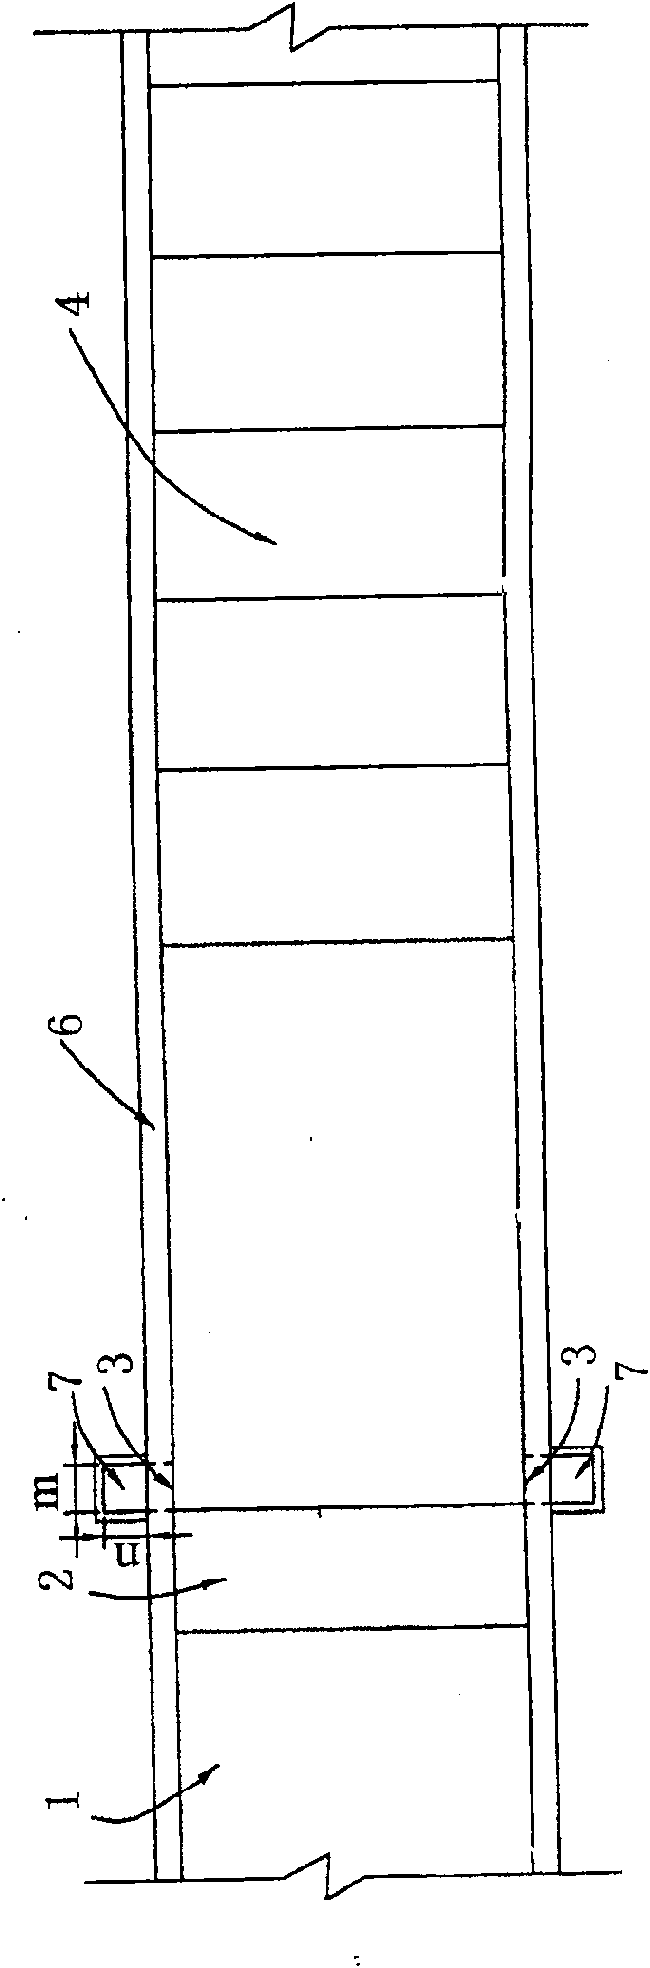 Ladder energy dissipater with doped gas device preposed